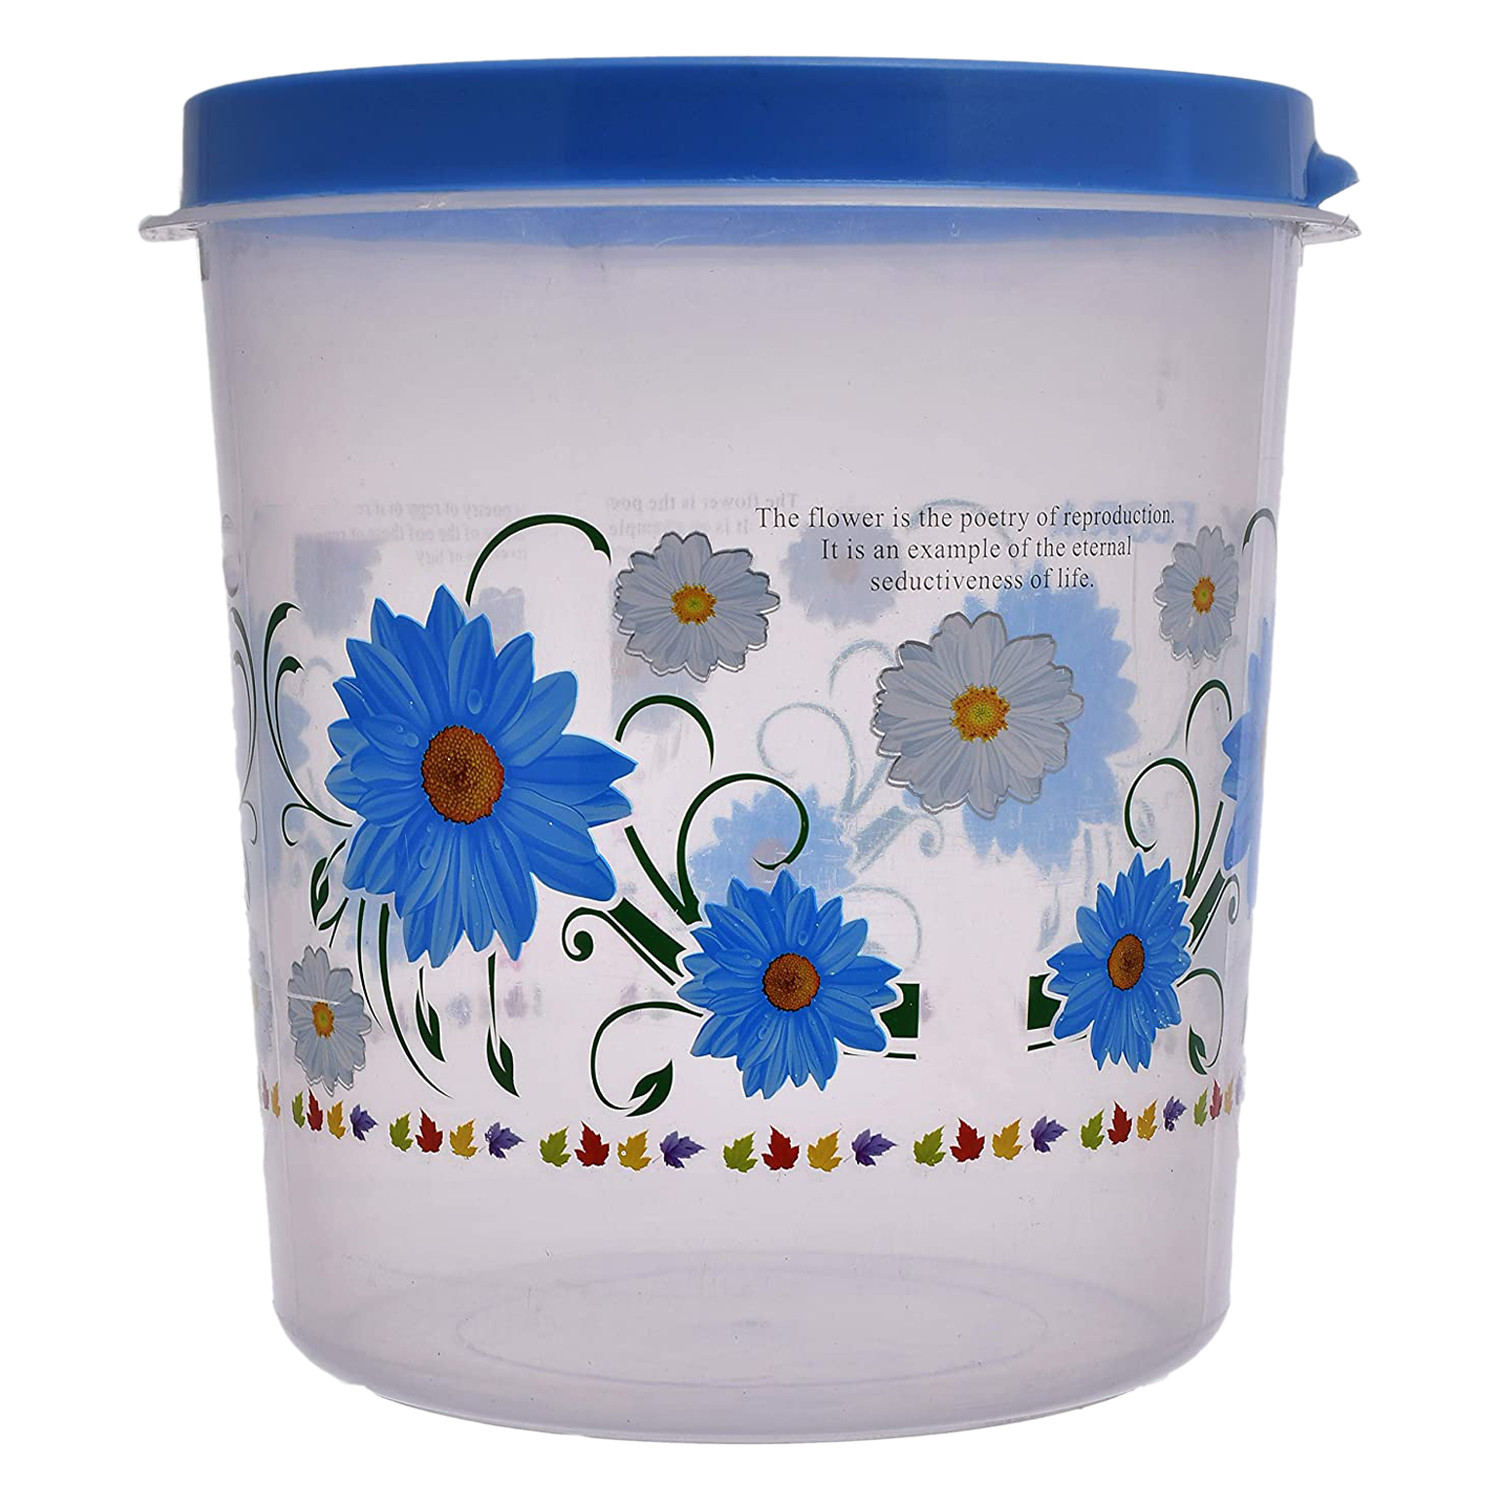 Kuber Industries Storage Container|Durable Plastic Floral Design BPA Free Food Kitchen Organizer With Lid|Food Utility Jar, 16 Ltr (Blue)